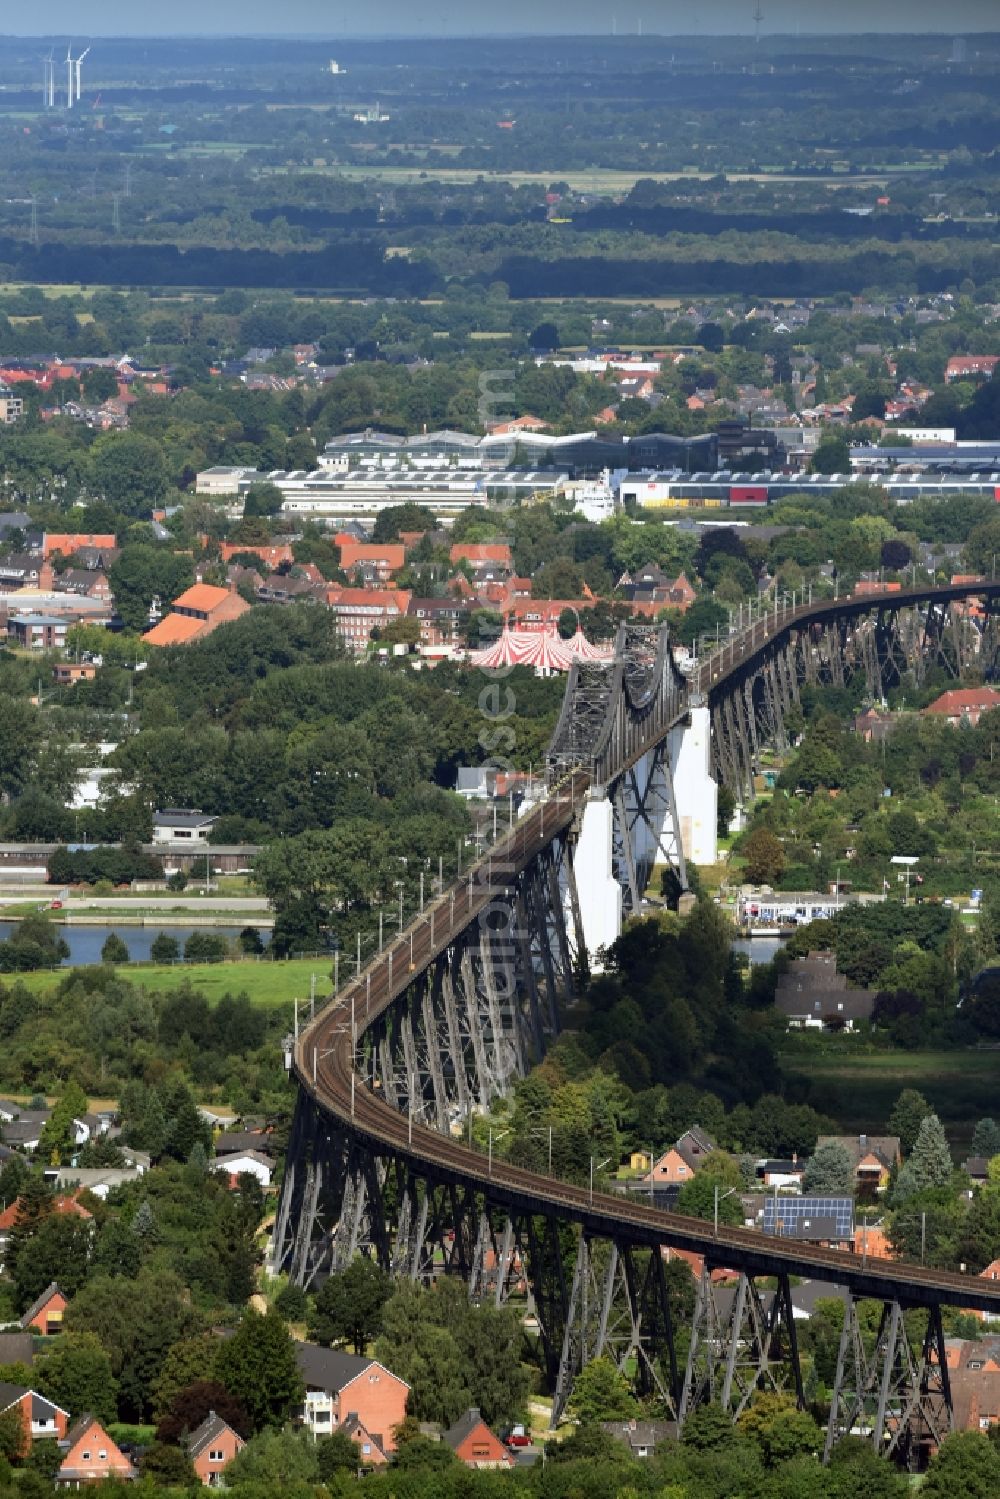 Osterrönfeld from above - Viaduct of the railway bridge structure to route the railway tracks in Osterroenfeld in the state Schleswig-Holstein